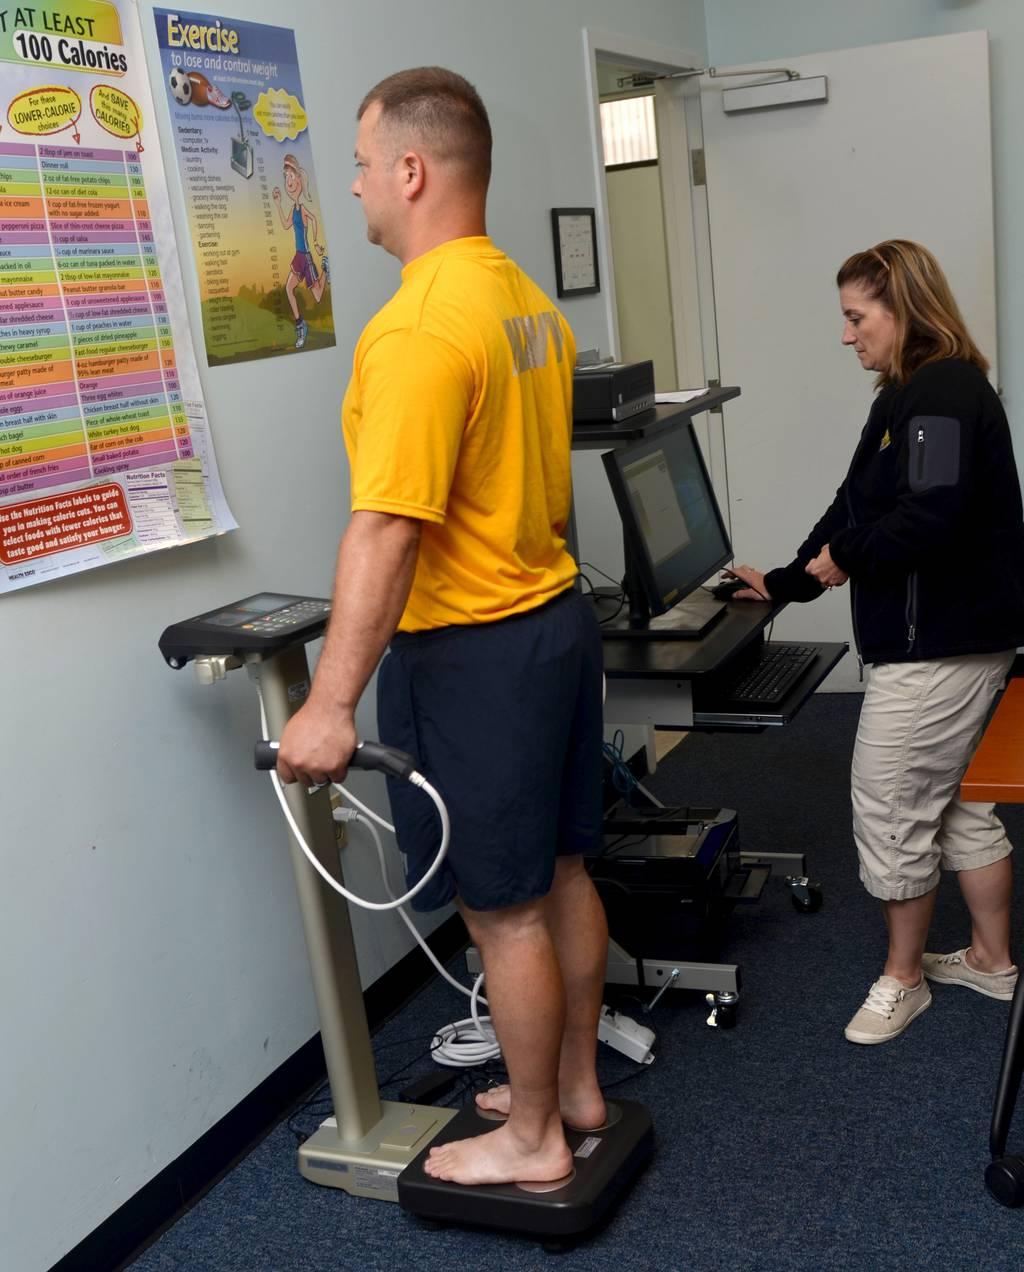 Misty Carman, a nurse educator at Naval Hospital Jacksonvilleâ€™s Wellness Center, used a body analyzer scale, which estimates body composition (including body fat, lean mass, bone mass, and water content), and resting met DoD overhauls its body composition and fitness policy